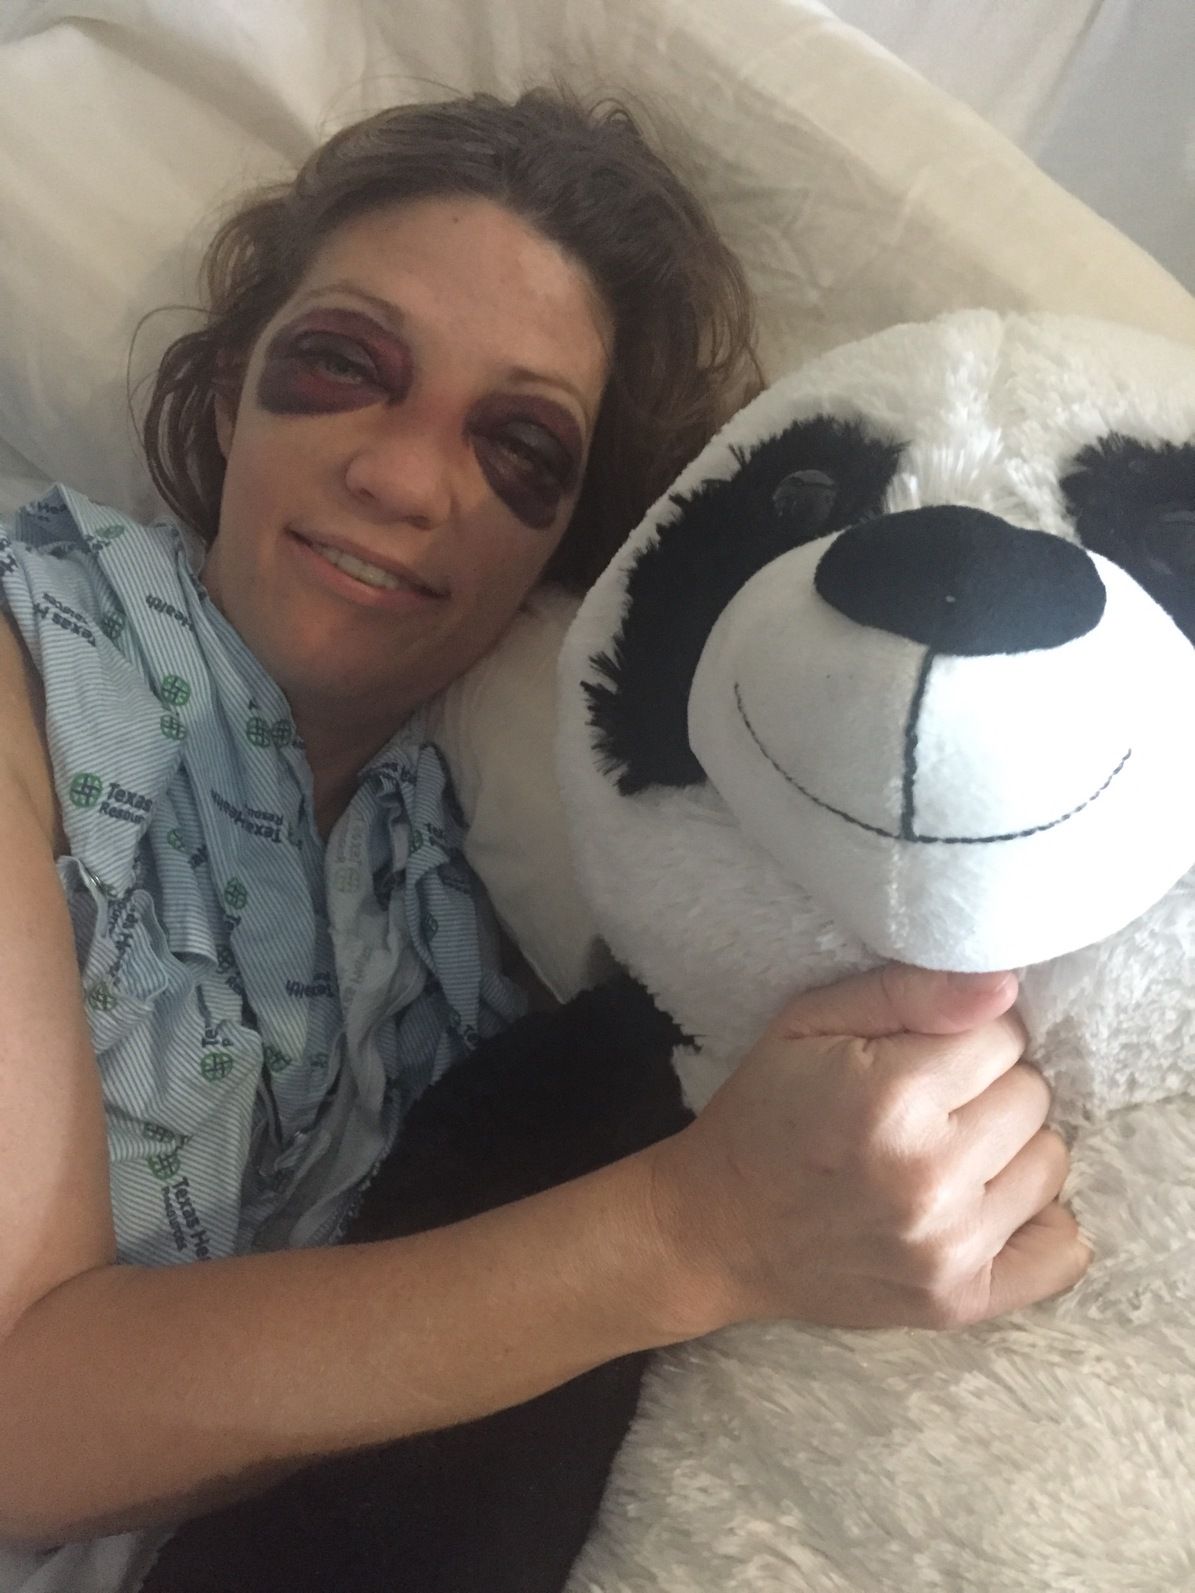 A friend fell and broke her face so someone got her a thoughtful gift